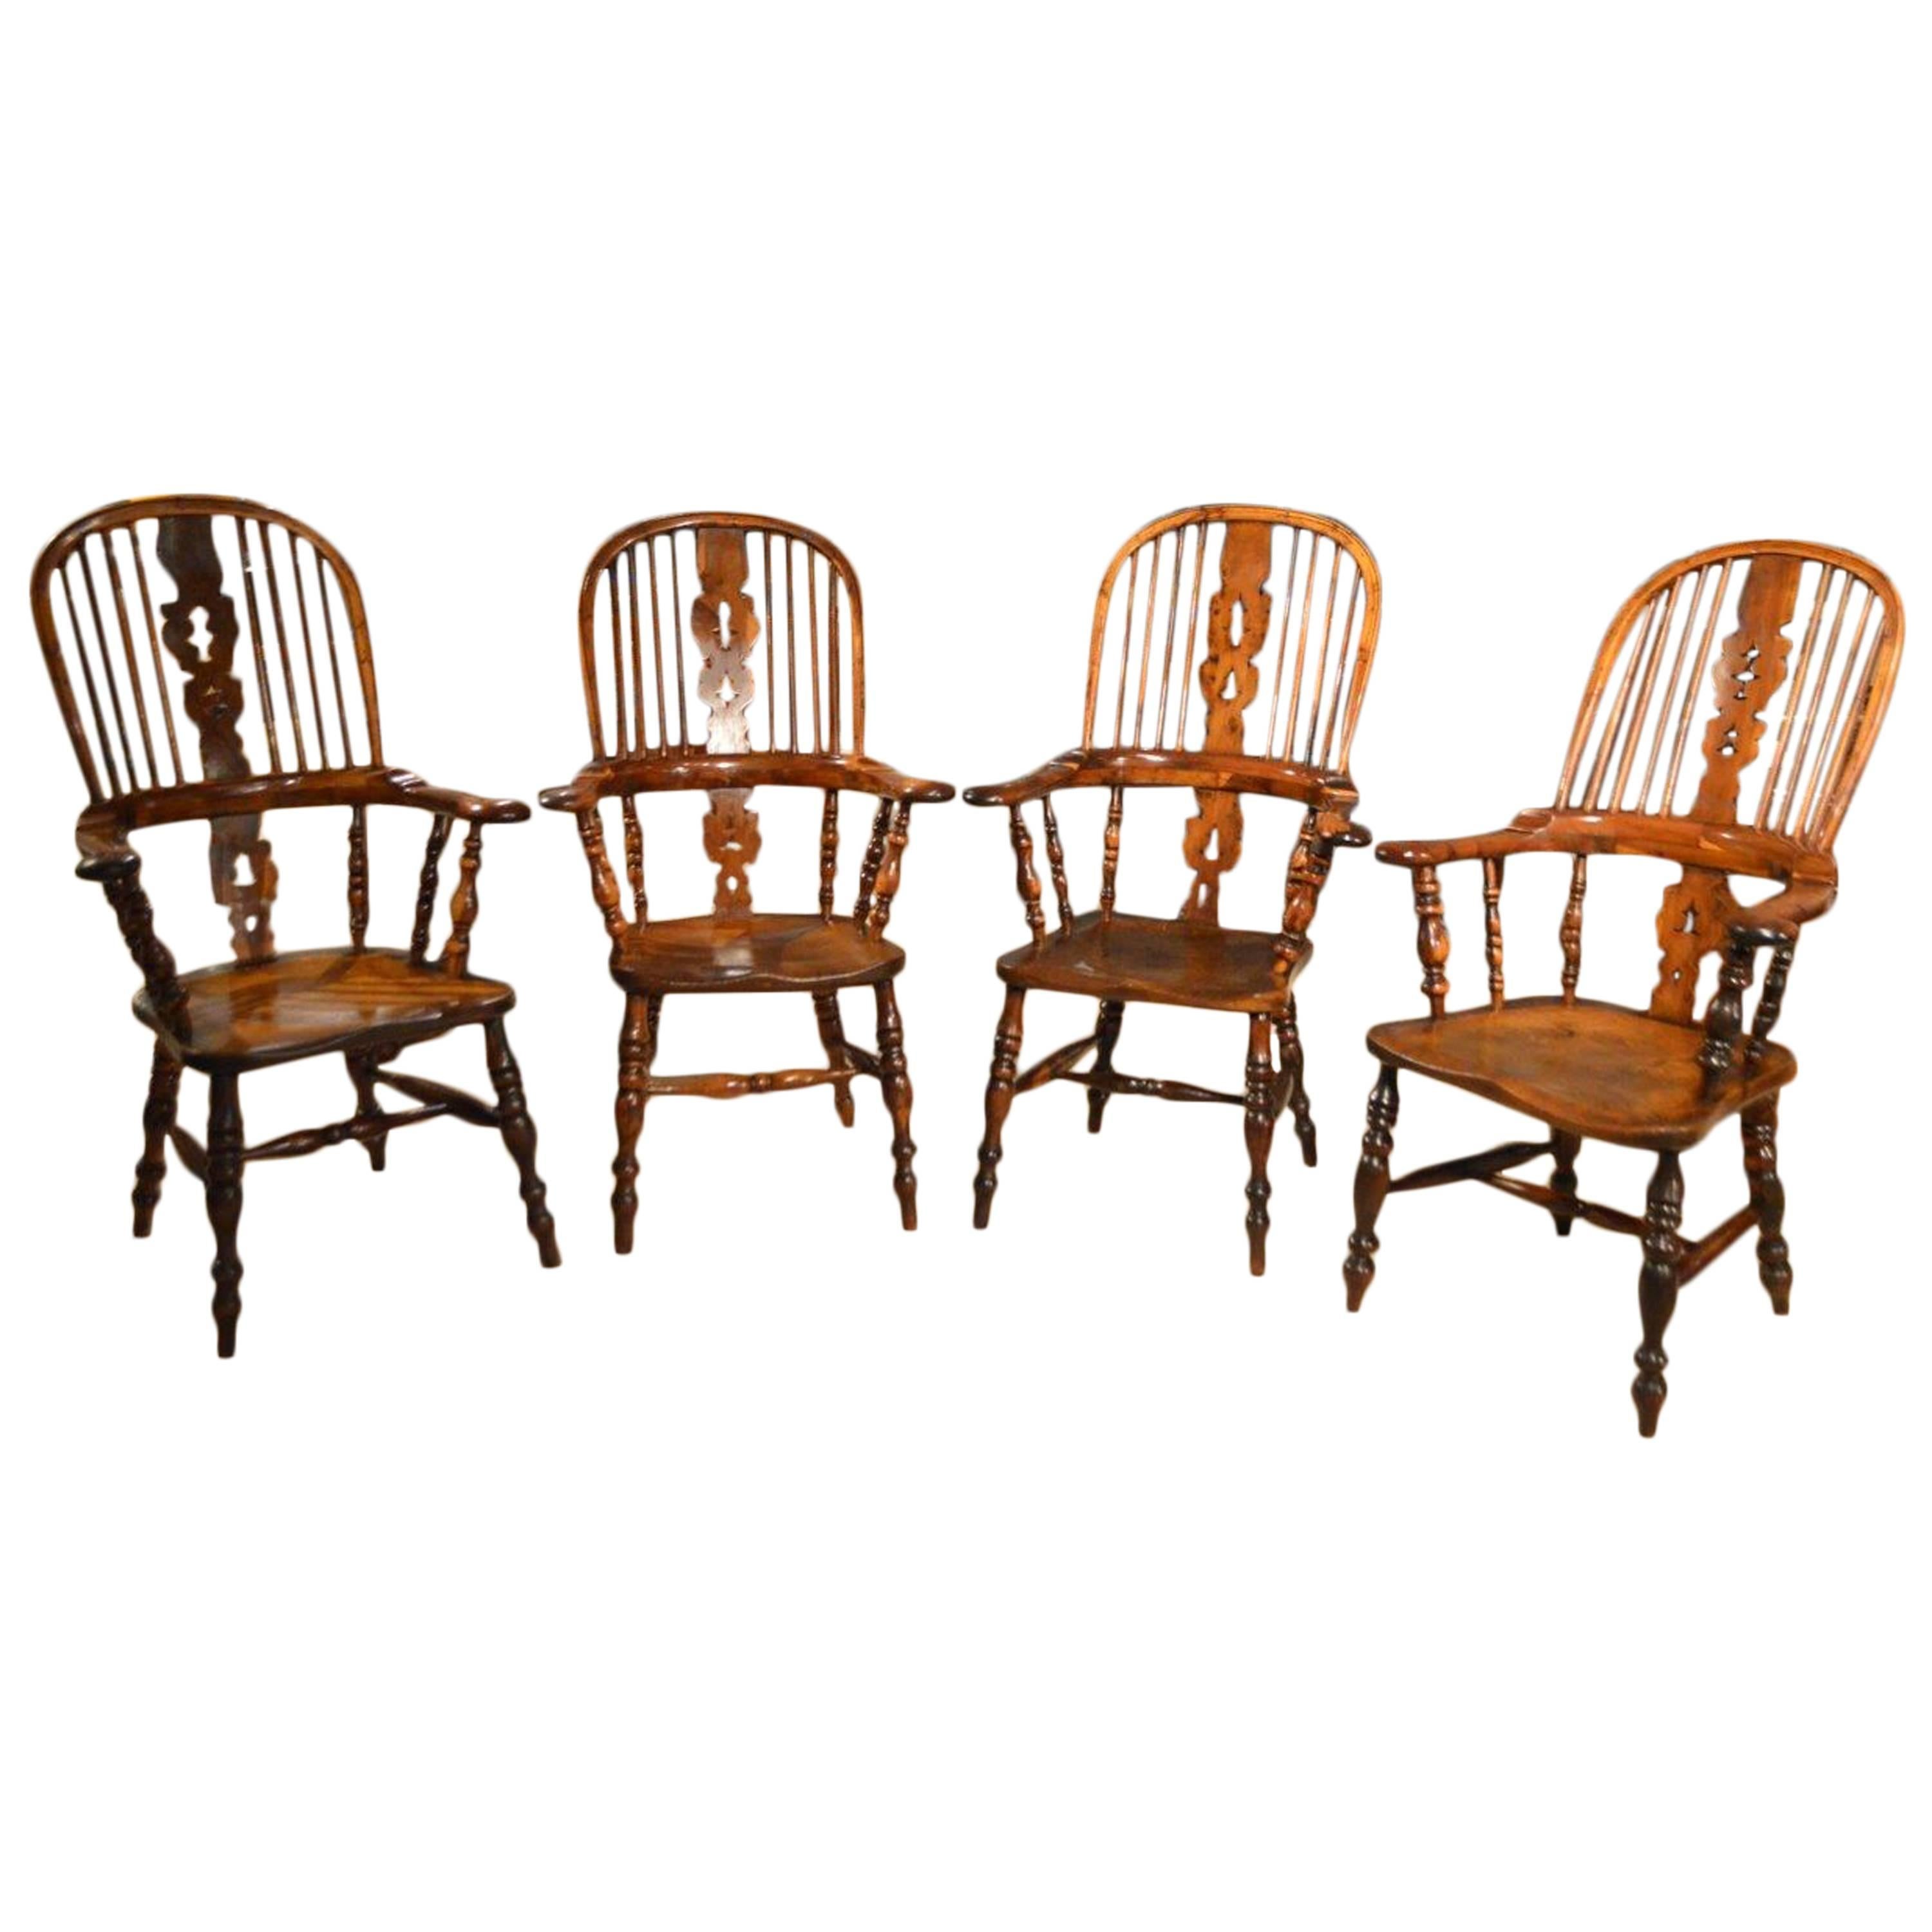 A Wonderful Set of 4 Yew Wood Broad Arm Windsor Chairs